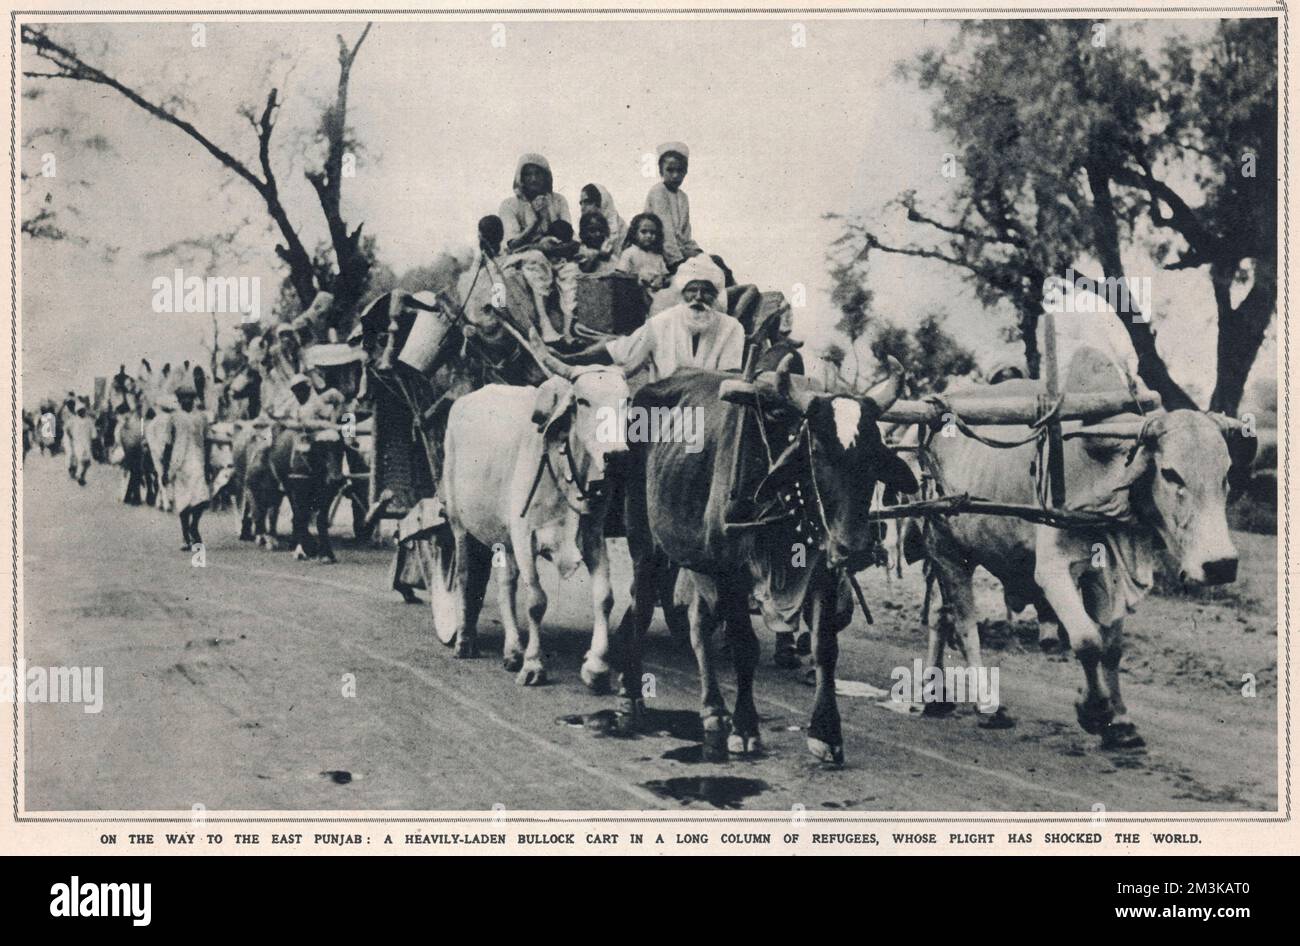 A heavily-laden bullock cart transporting an extended Sikh refugee family fleeing the communal rioting and additional violence in the East Punjab region associated with the Partition of India (and creation of Pakistan)   1947 Stock Photo